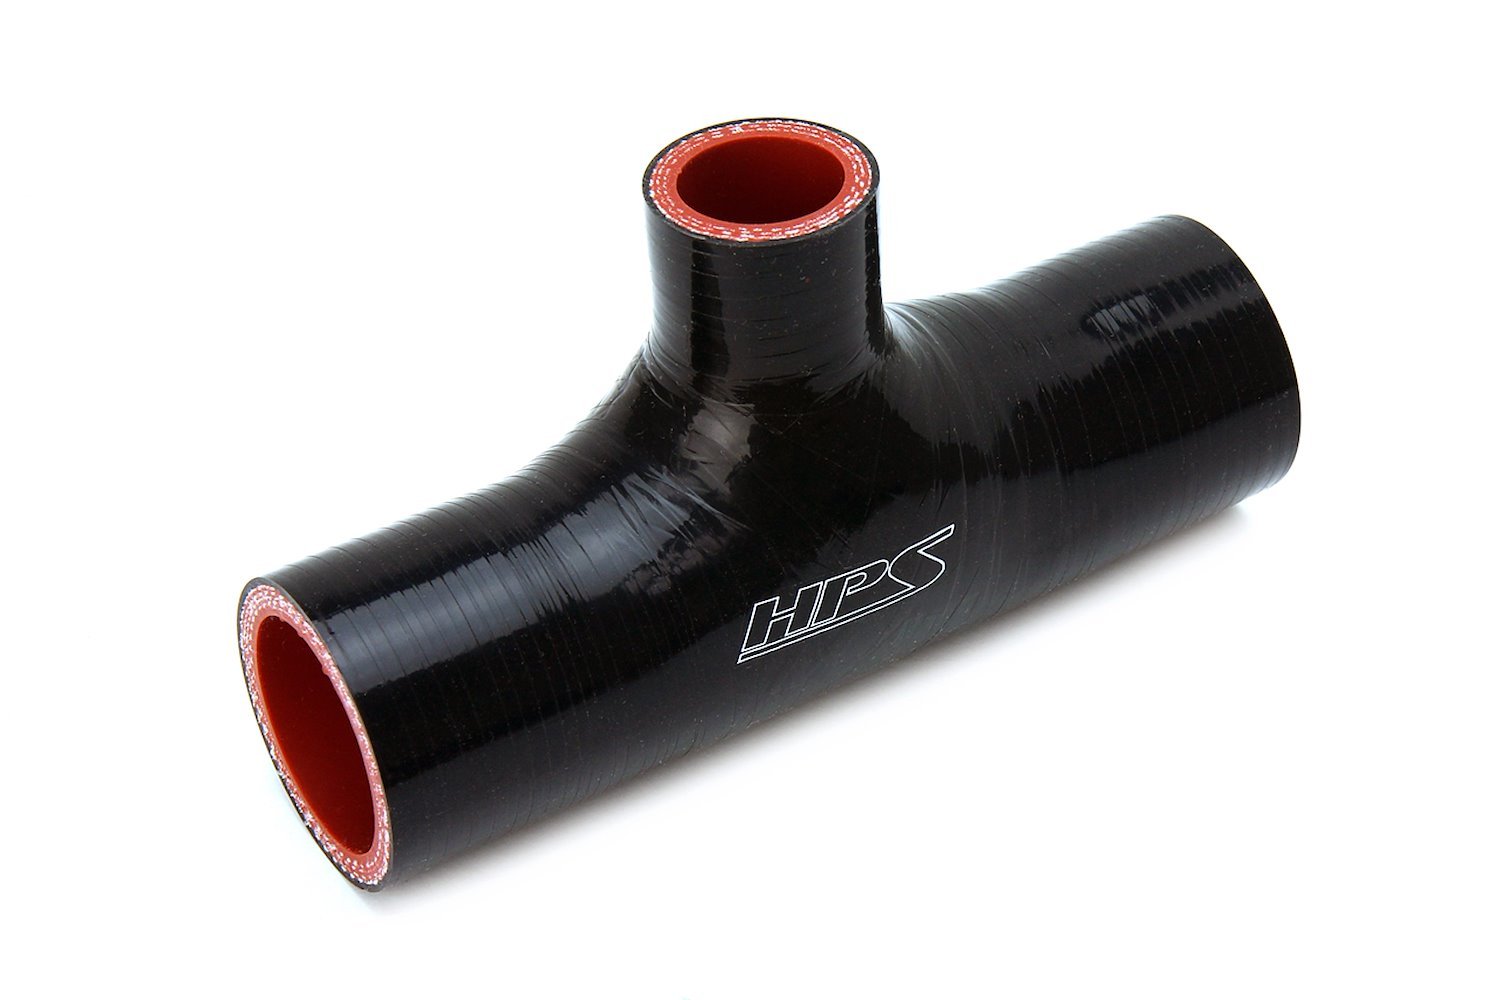 300-THOSE-100-BLK Silicone Tee Hose Adapter, High-Temp 4-Ply Reinforced, 3 in. ID, Black